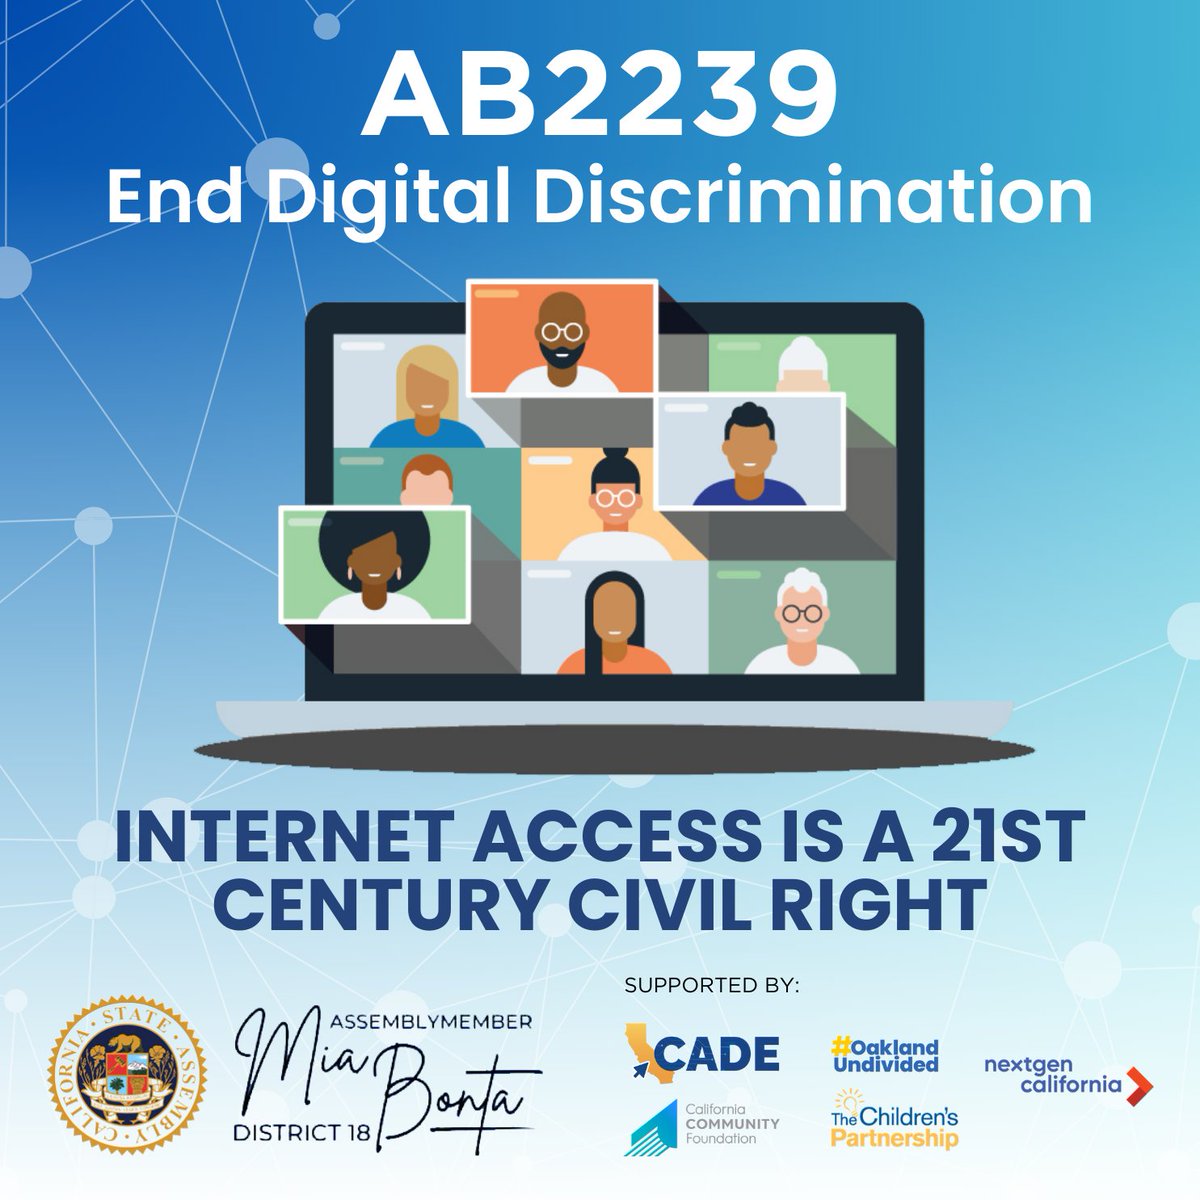 This Thursday, April 4 join us for a virtual #townhall with @AsmMiaBonta, @calfund, @OakUndivided, @KidsPartnership, and @NextGen_Policy to discuss #AB2239, a bill that cracks down on digital discrimination in California. Register: bit.ly/AB2239TownHall